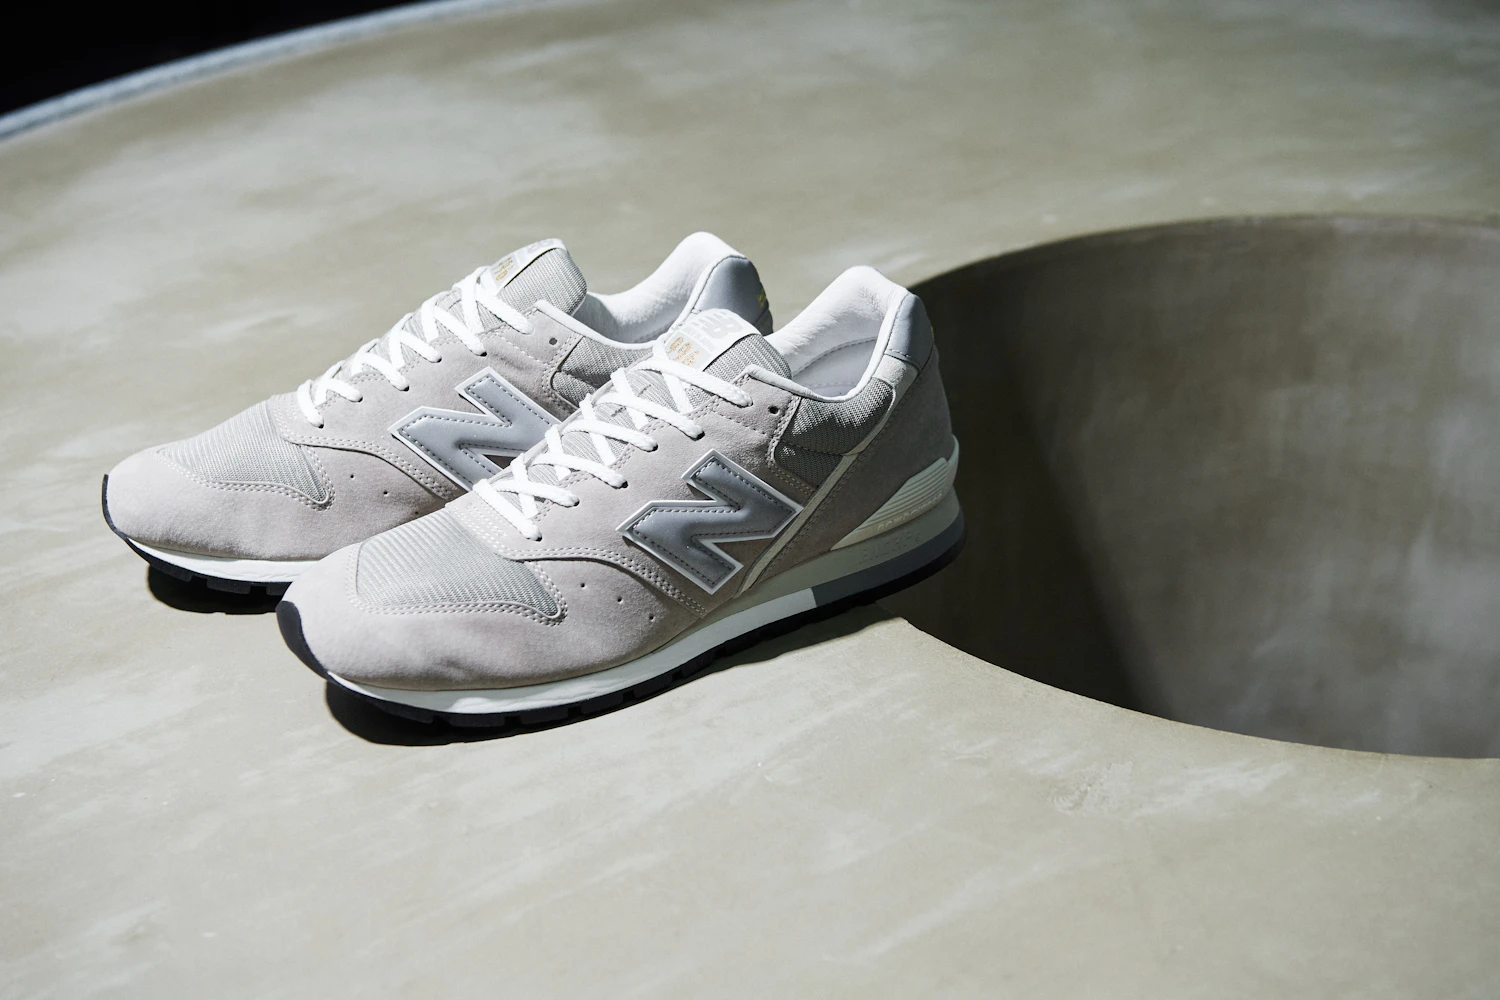 History u0026 Evolution: The New Balance '996' Marks Its 35th Anniversary as a  Signature Shoe of the Brand! | Fashion Tech News